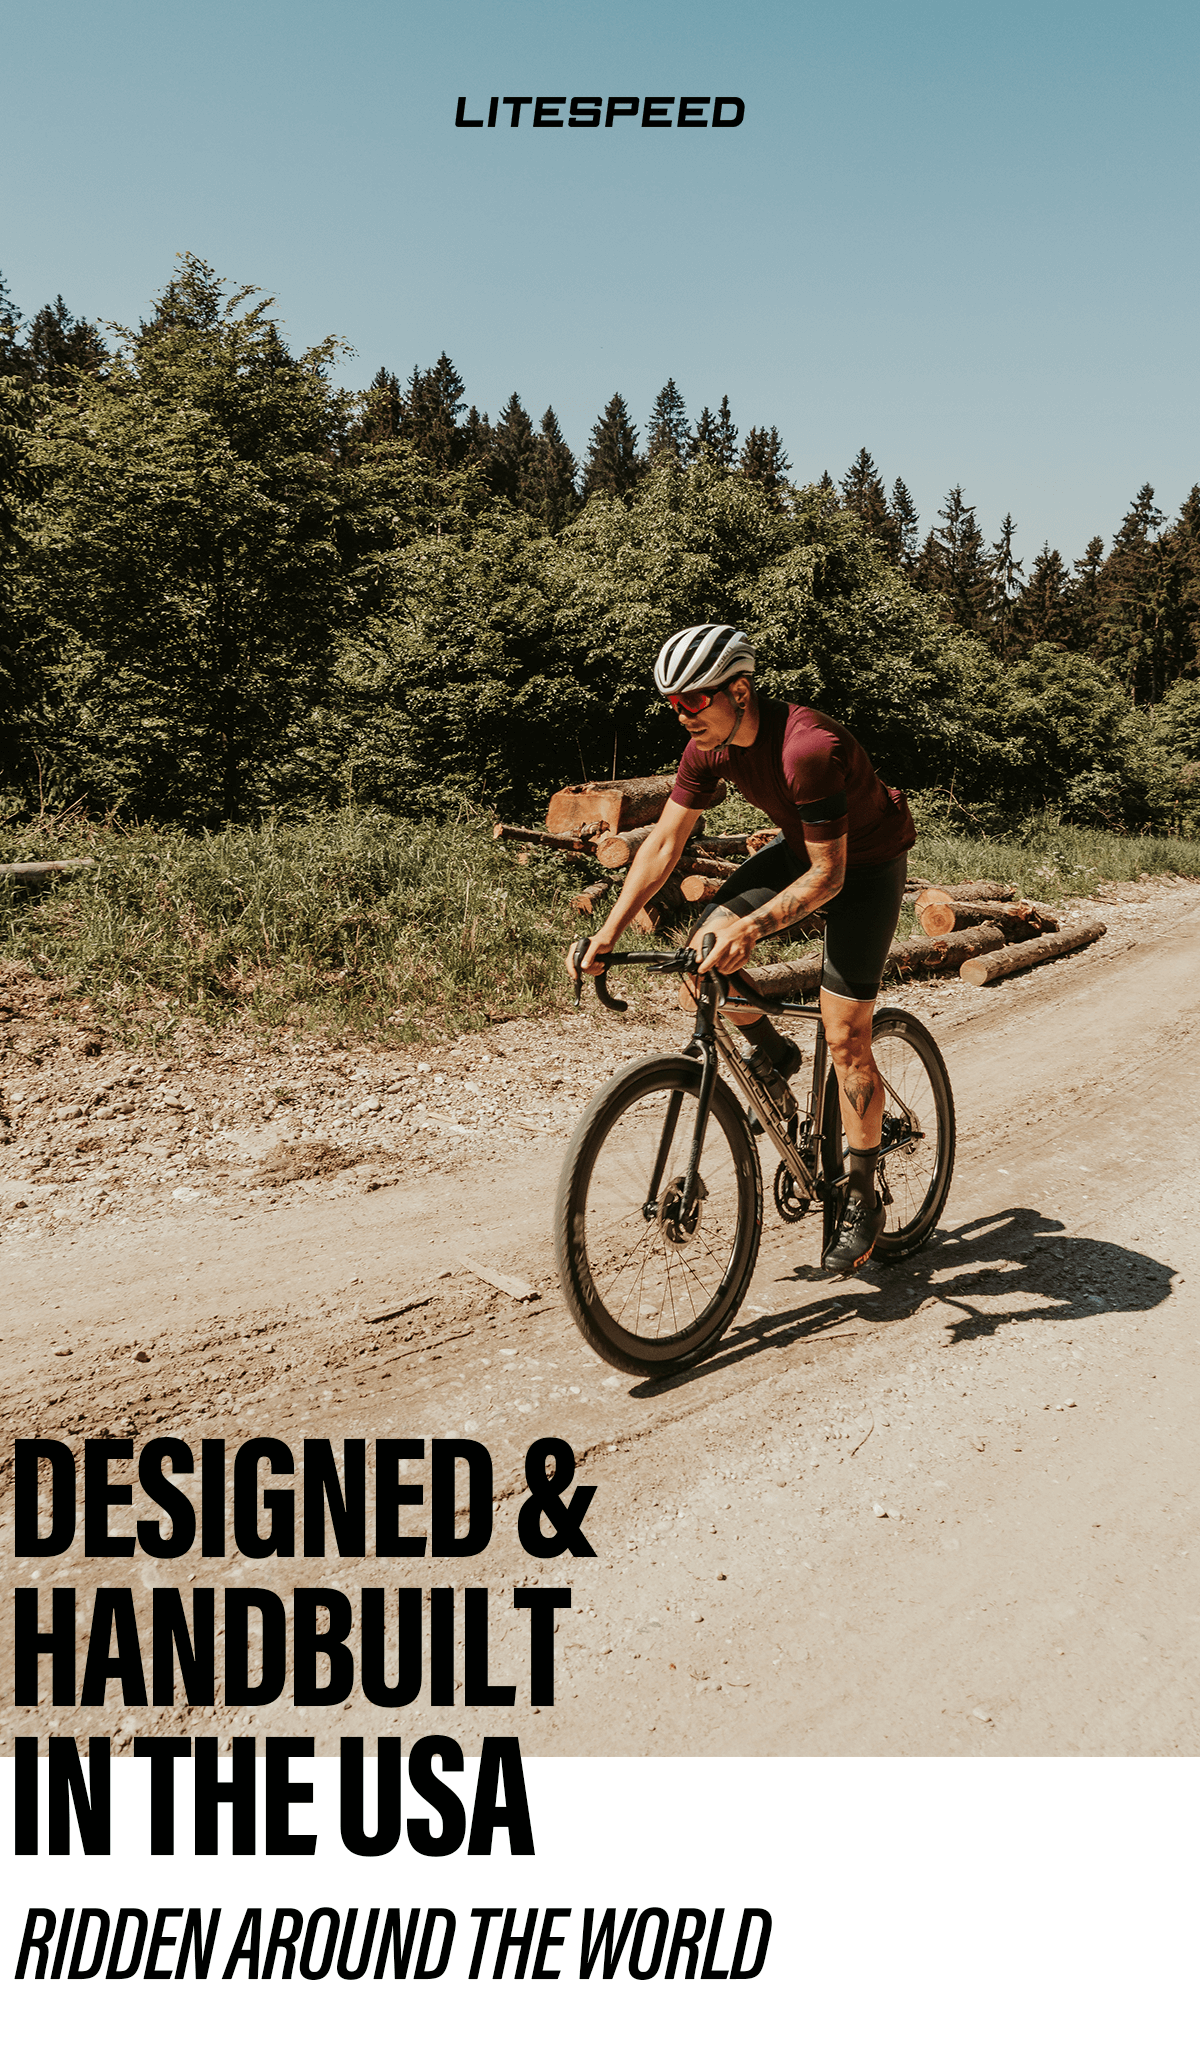 Designed and handbuilt in the USA, ridden around the world: Experience the Litespeed Titanium difference.